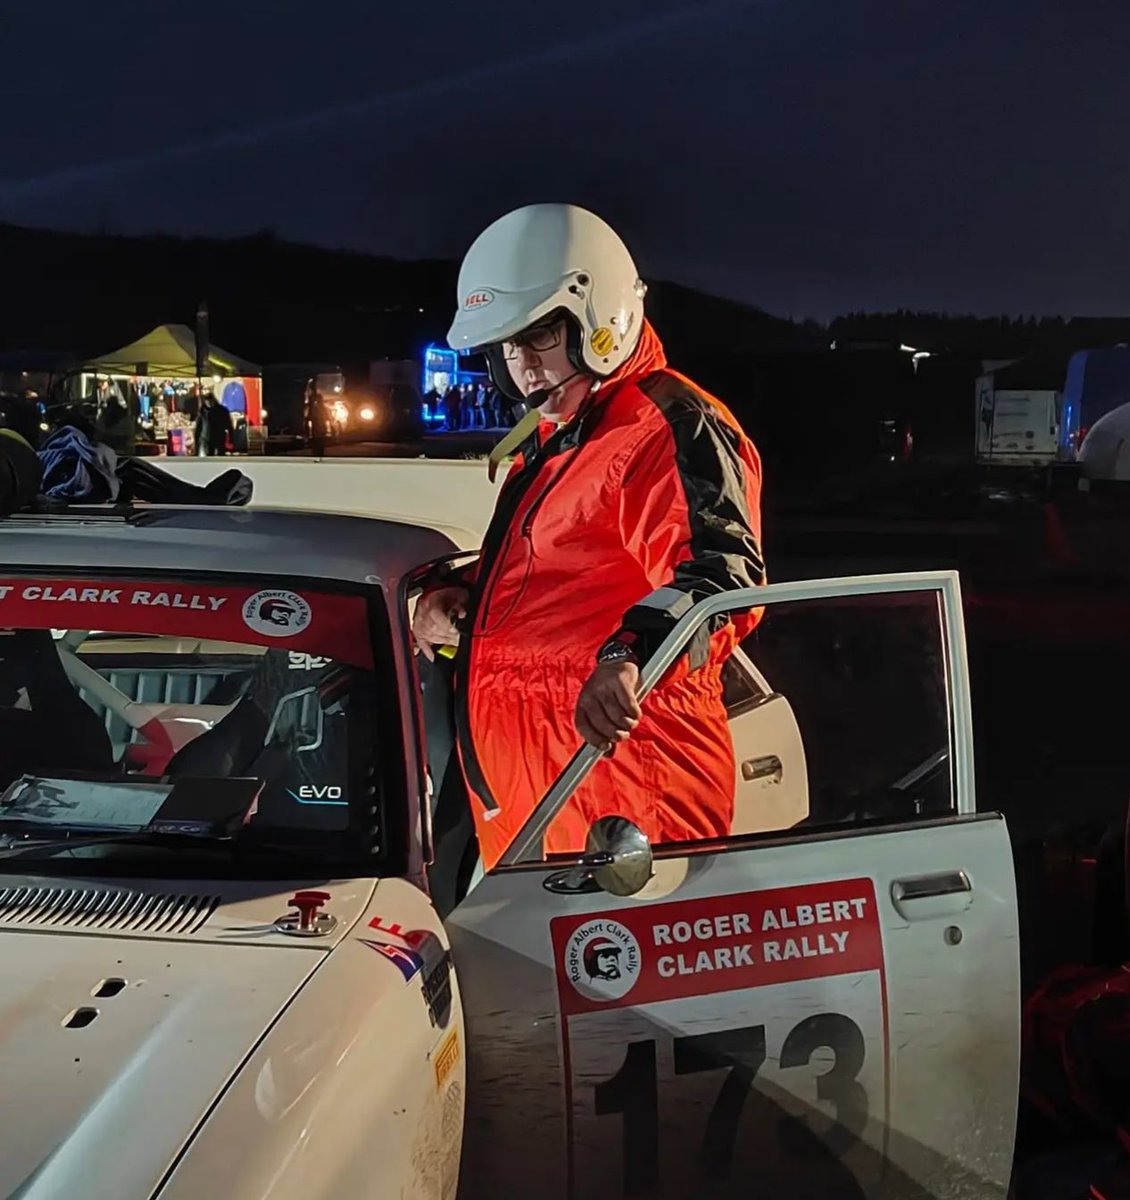 Ryan is ready for his second job as a search and rescue helicopter pilot @RACRMC | @RallyingUK